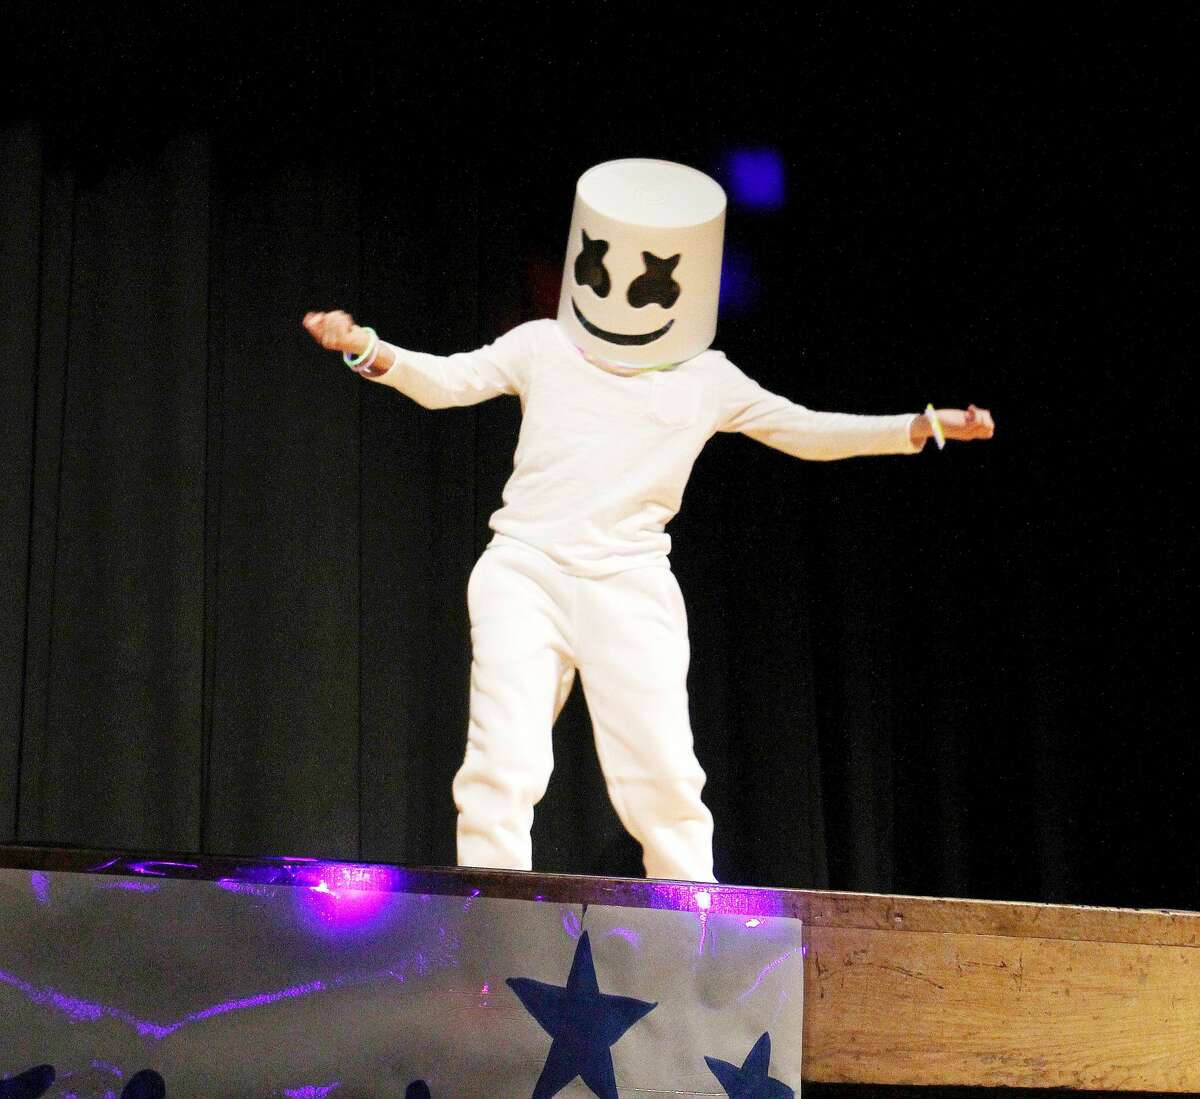 Gearing up for nationwide tour next month, Marshmello got the crowd hype Thursday night during the Bad Axe Talent Show. Marshmello, played by Bad Axe fourth grader Quentin Eisinger, performed his latest hit, Happier. The talent show featured 24 different acts ranging from musical performances to stand up comedy.